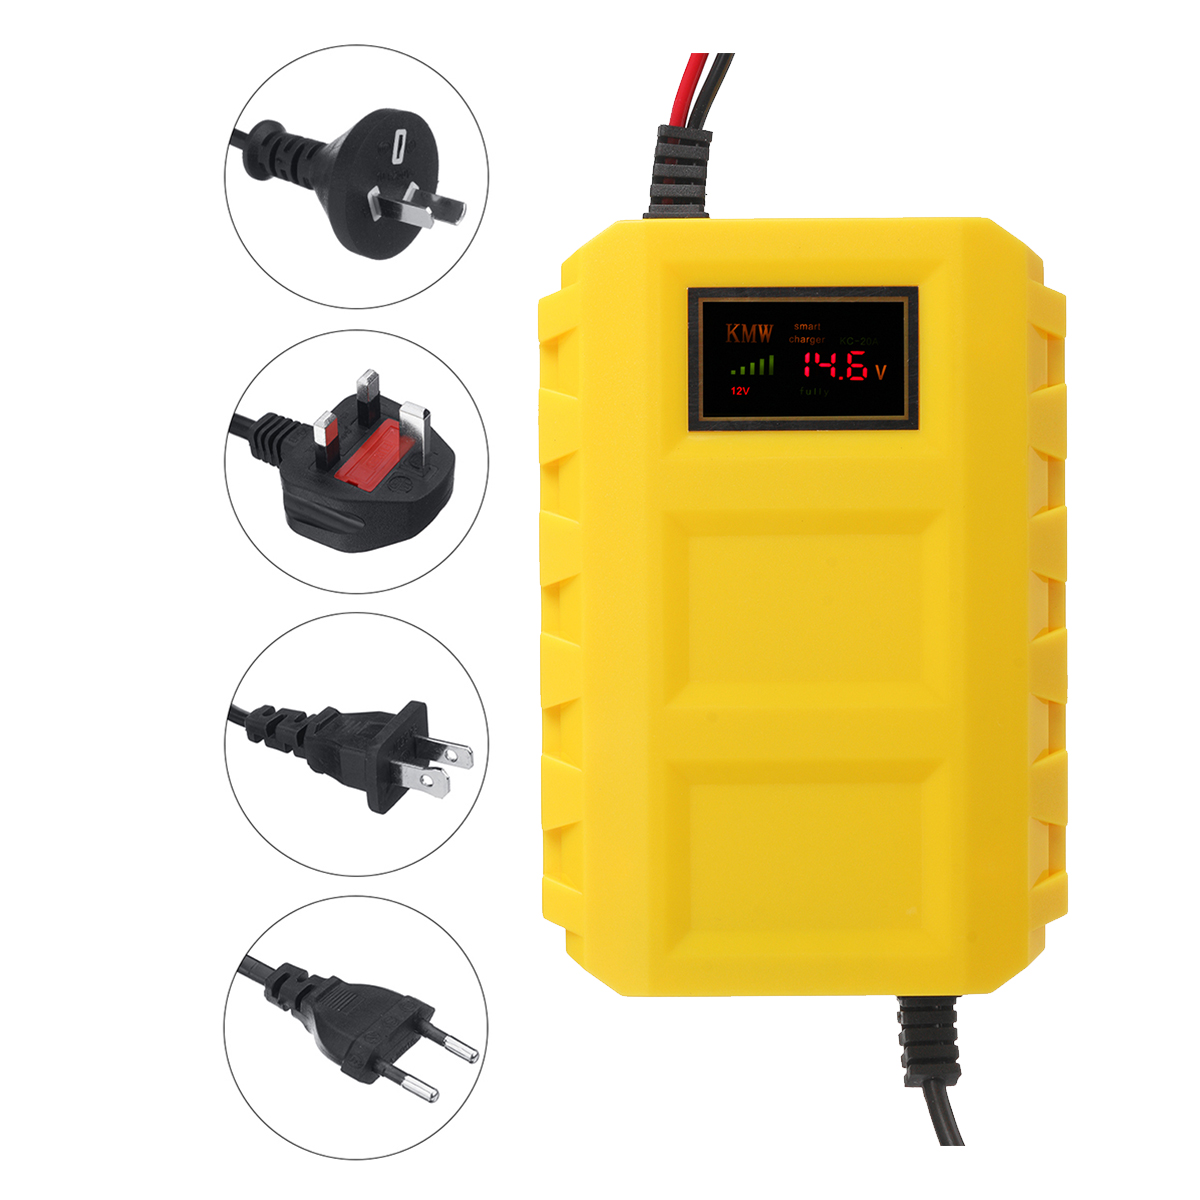 

100-245V 12V 20A Dispaly Smart Battery Charger Maintainer Lead Acid Battery Charger with Battery Repair